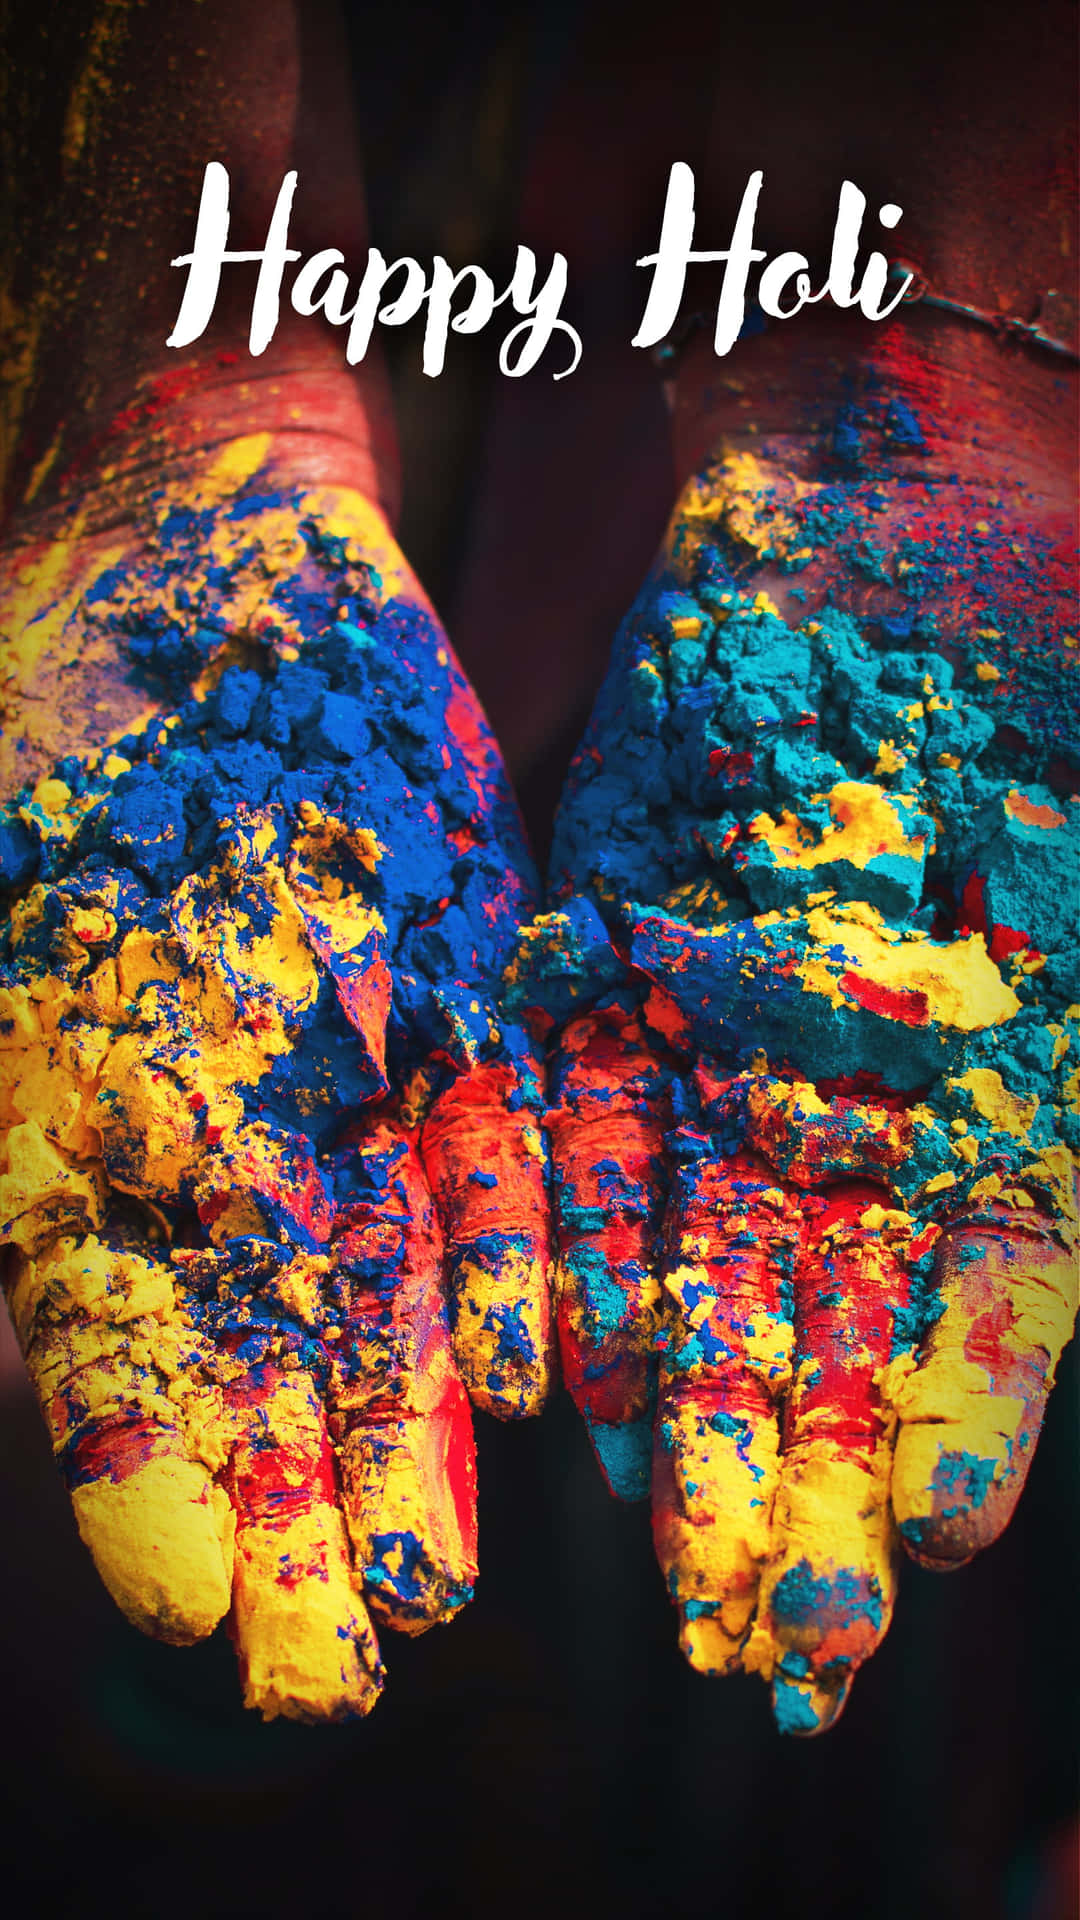 Best Hindi Happy Holi Wishes In Advance Holi Images Wallpaper